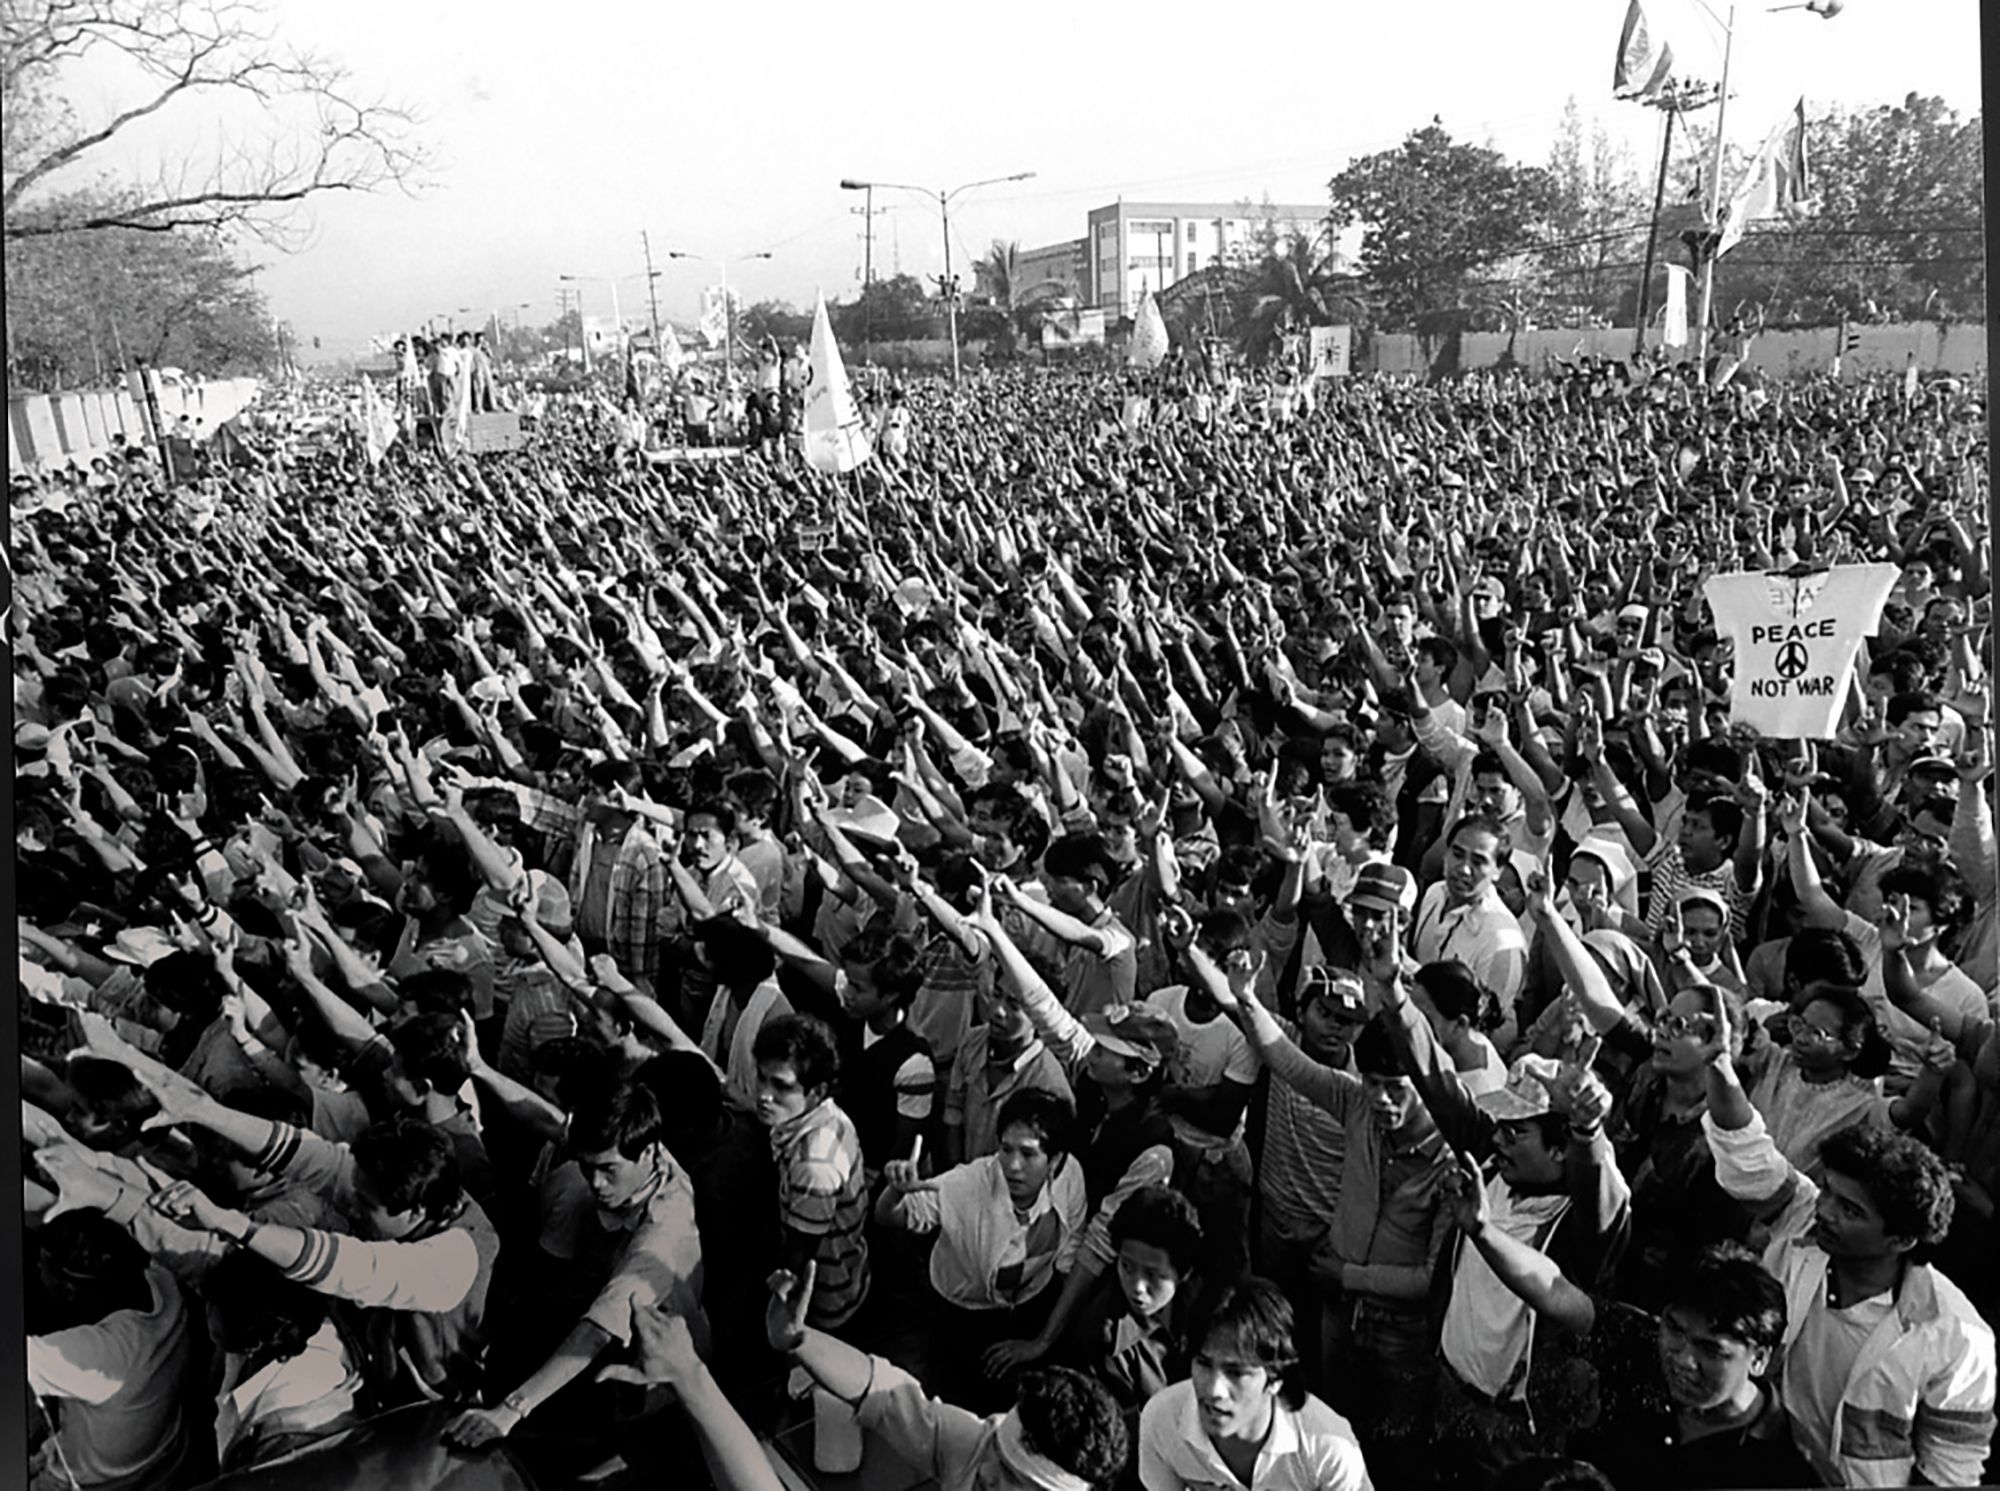 EDSA Revolution: A Look Back At The Historic 1986 People Power